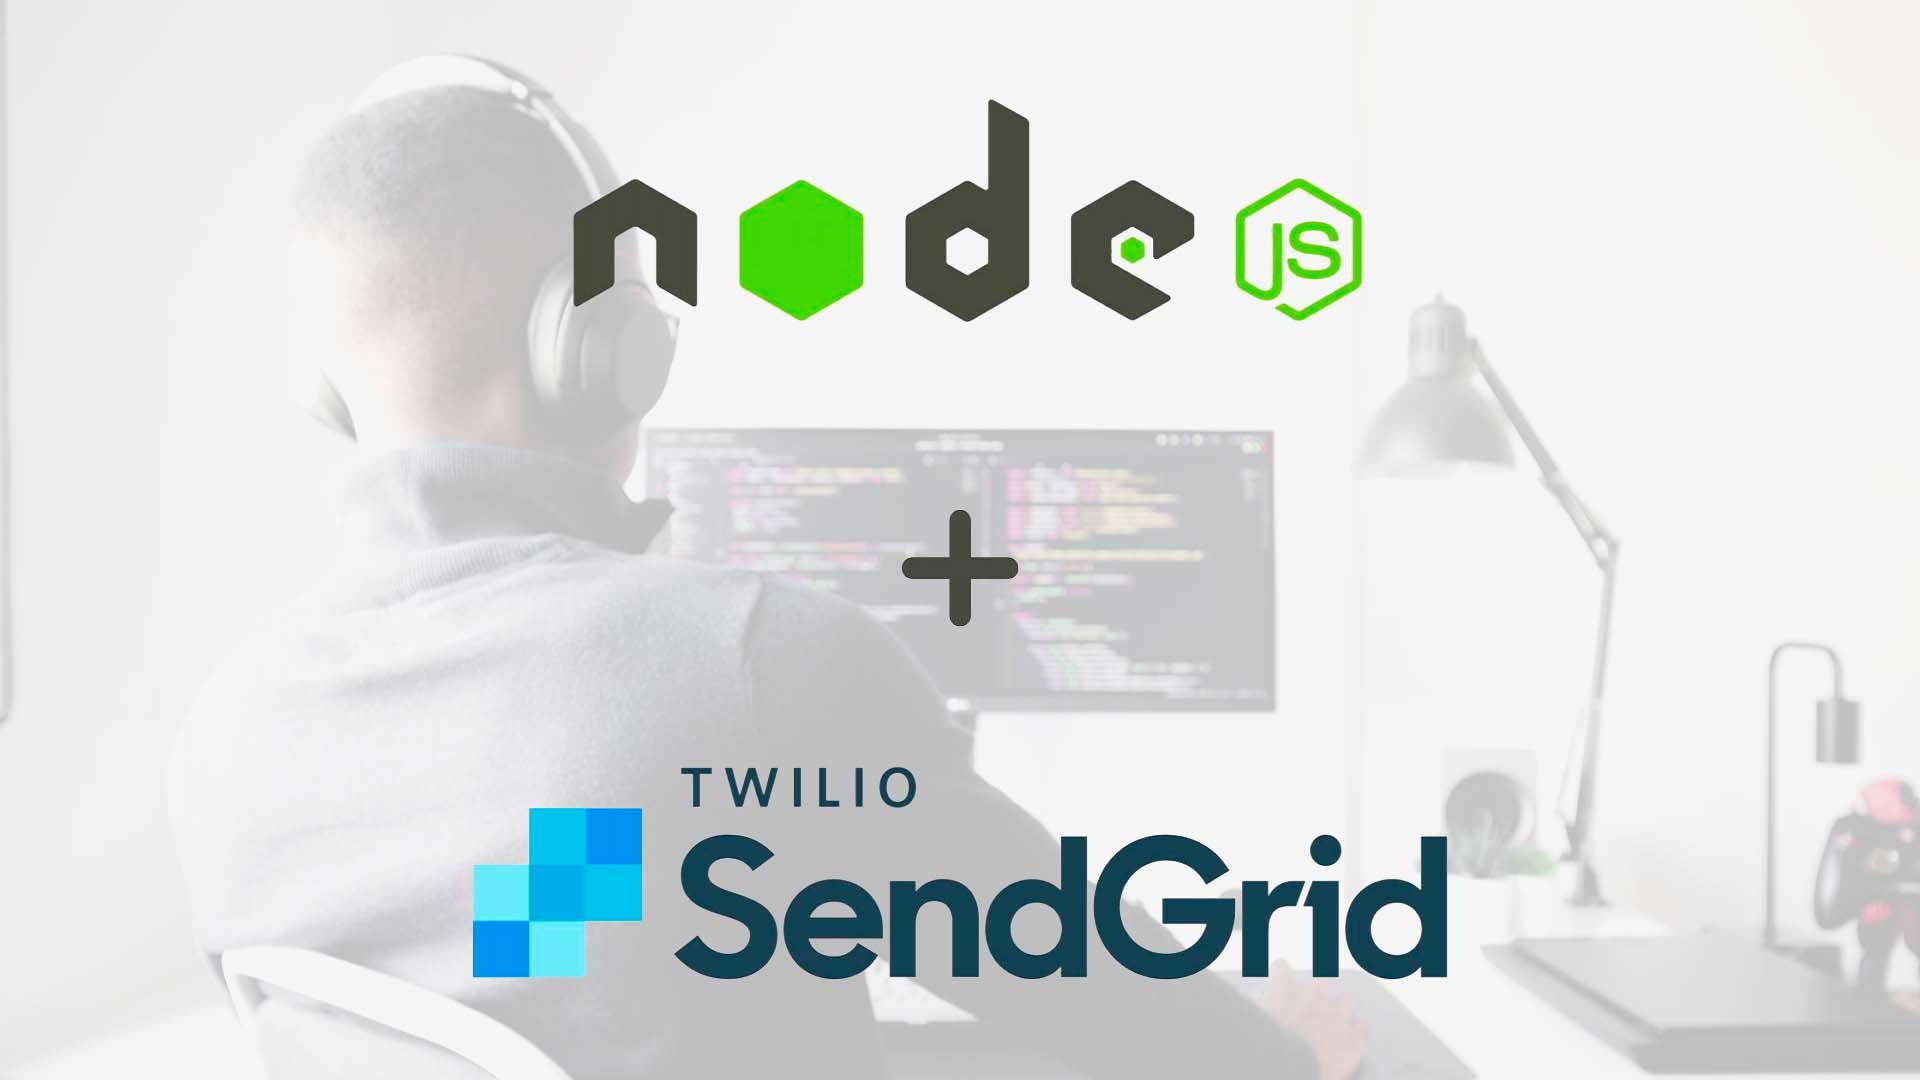 How to send a email using Sendgrid and Node.js